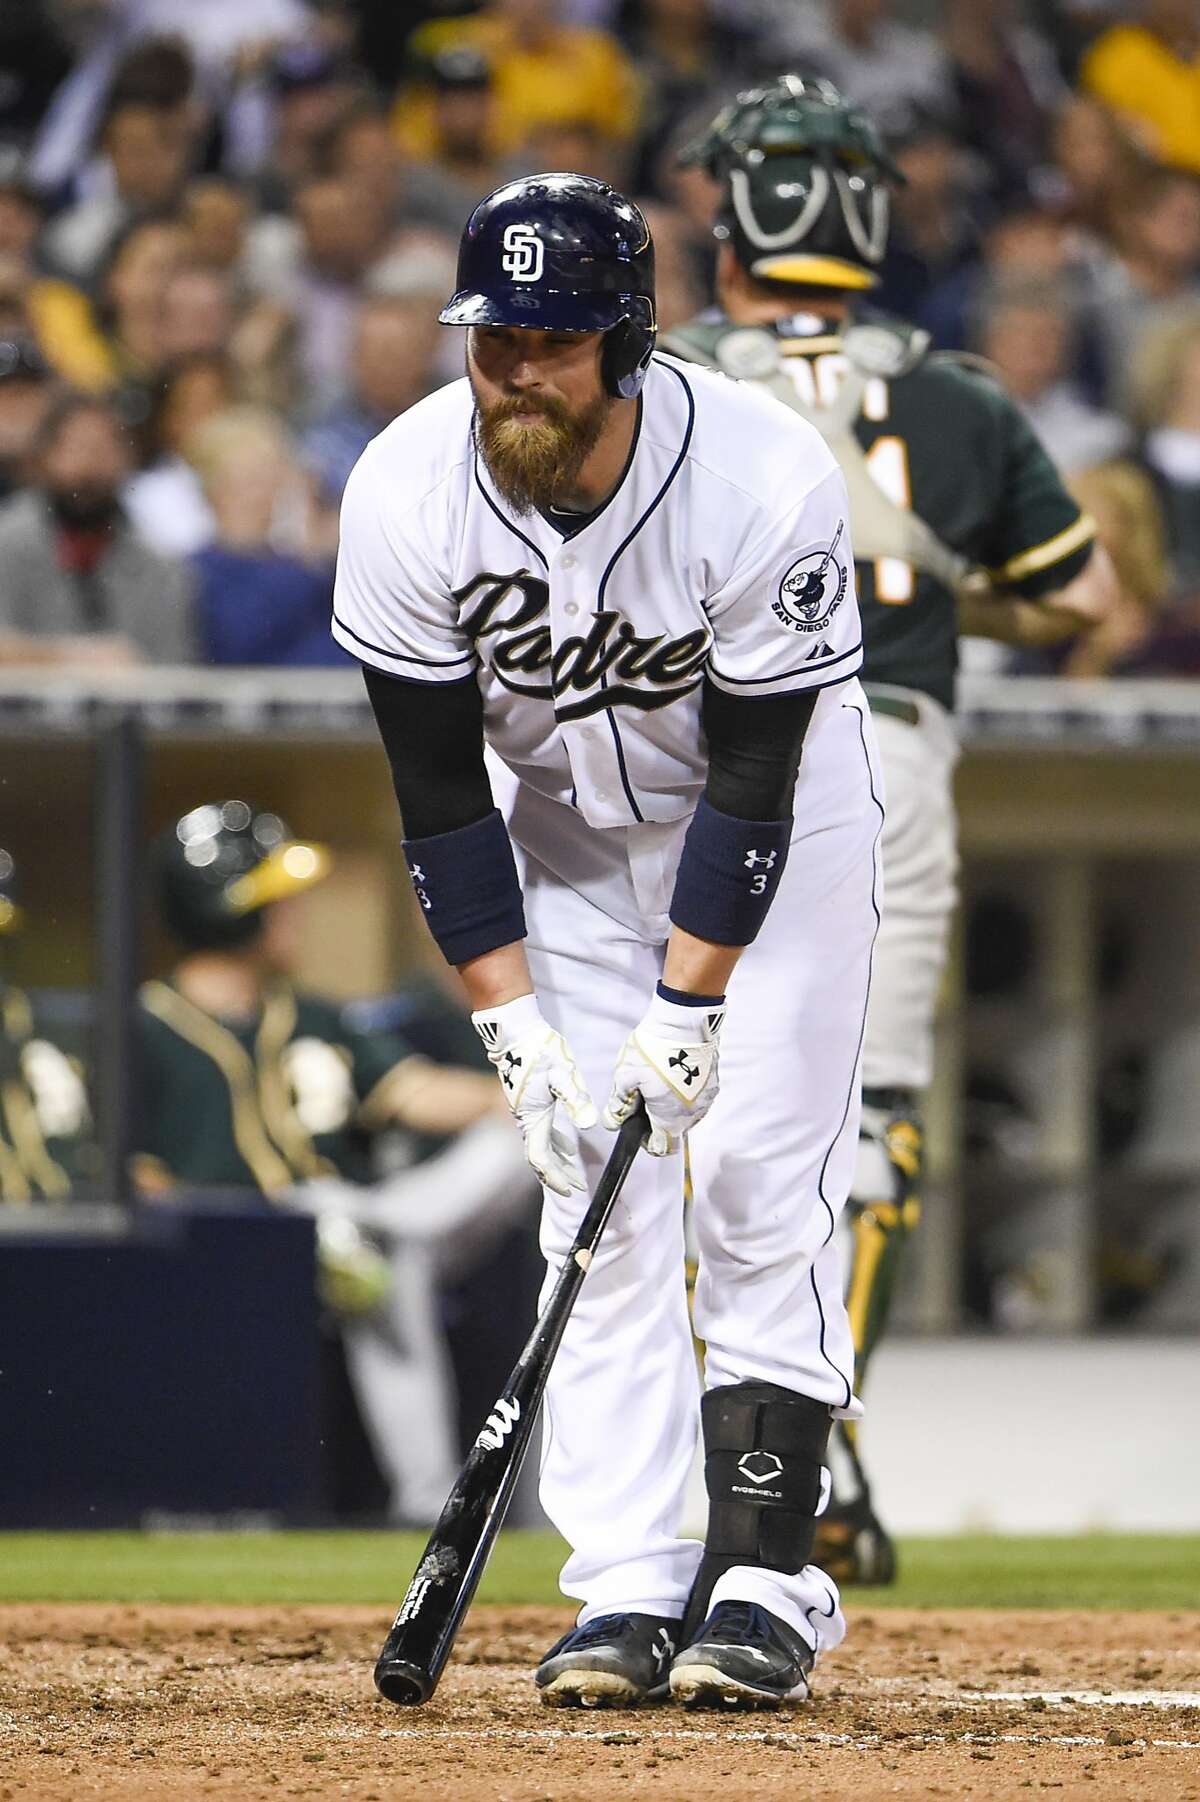 SAN DIEGO, CA - JUNE 15: Derek Norris #3 of the San Diego Padres reacts after striking out during the fourth inning of a baseball game against the Oakland Athletics at Petco Park June 15, 2015 in San Diego, California. (Photo by Denis Poroy/Getty Images)